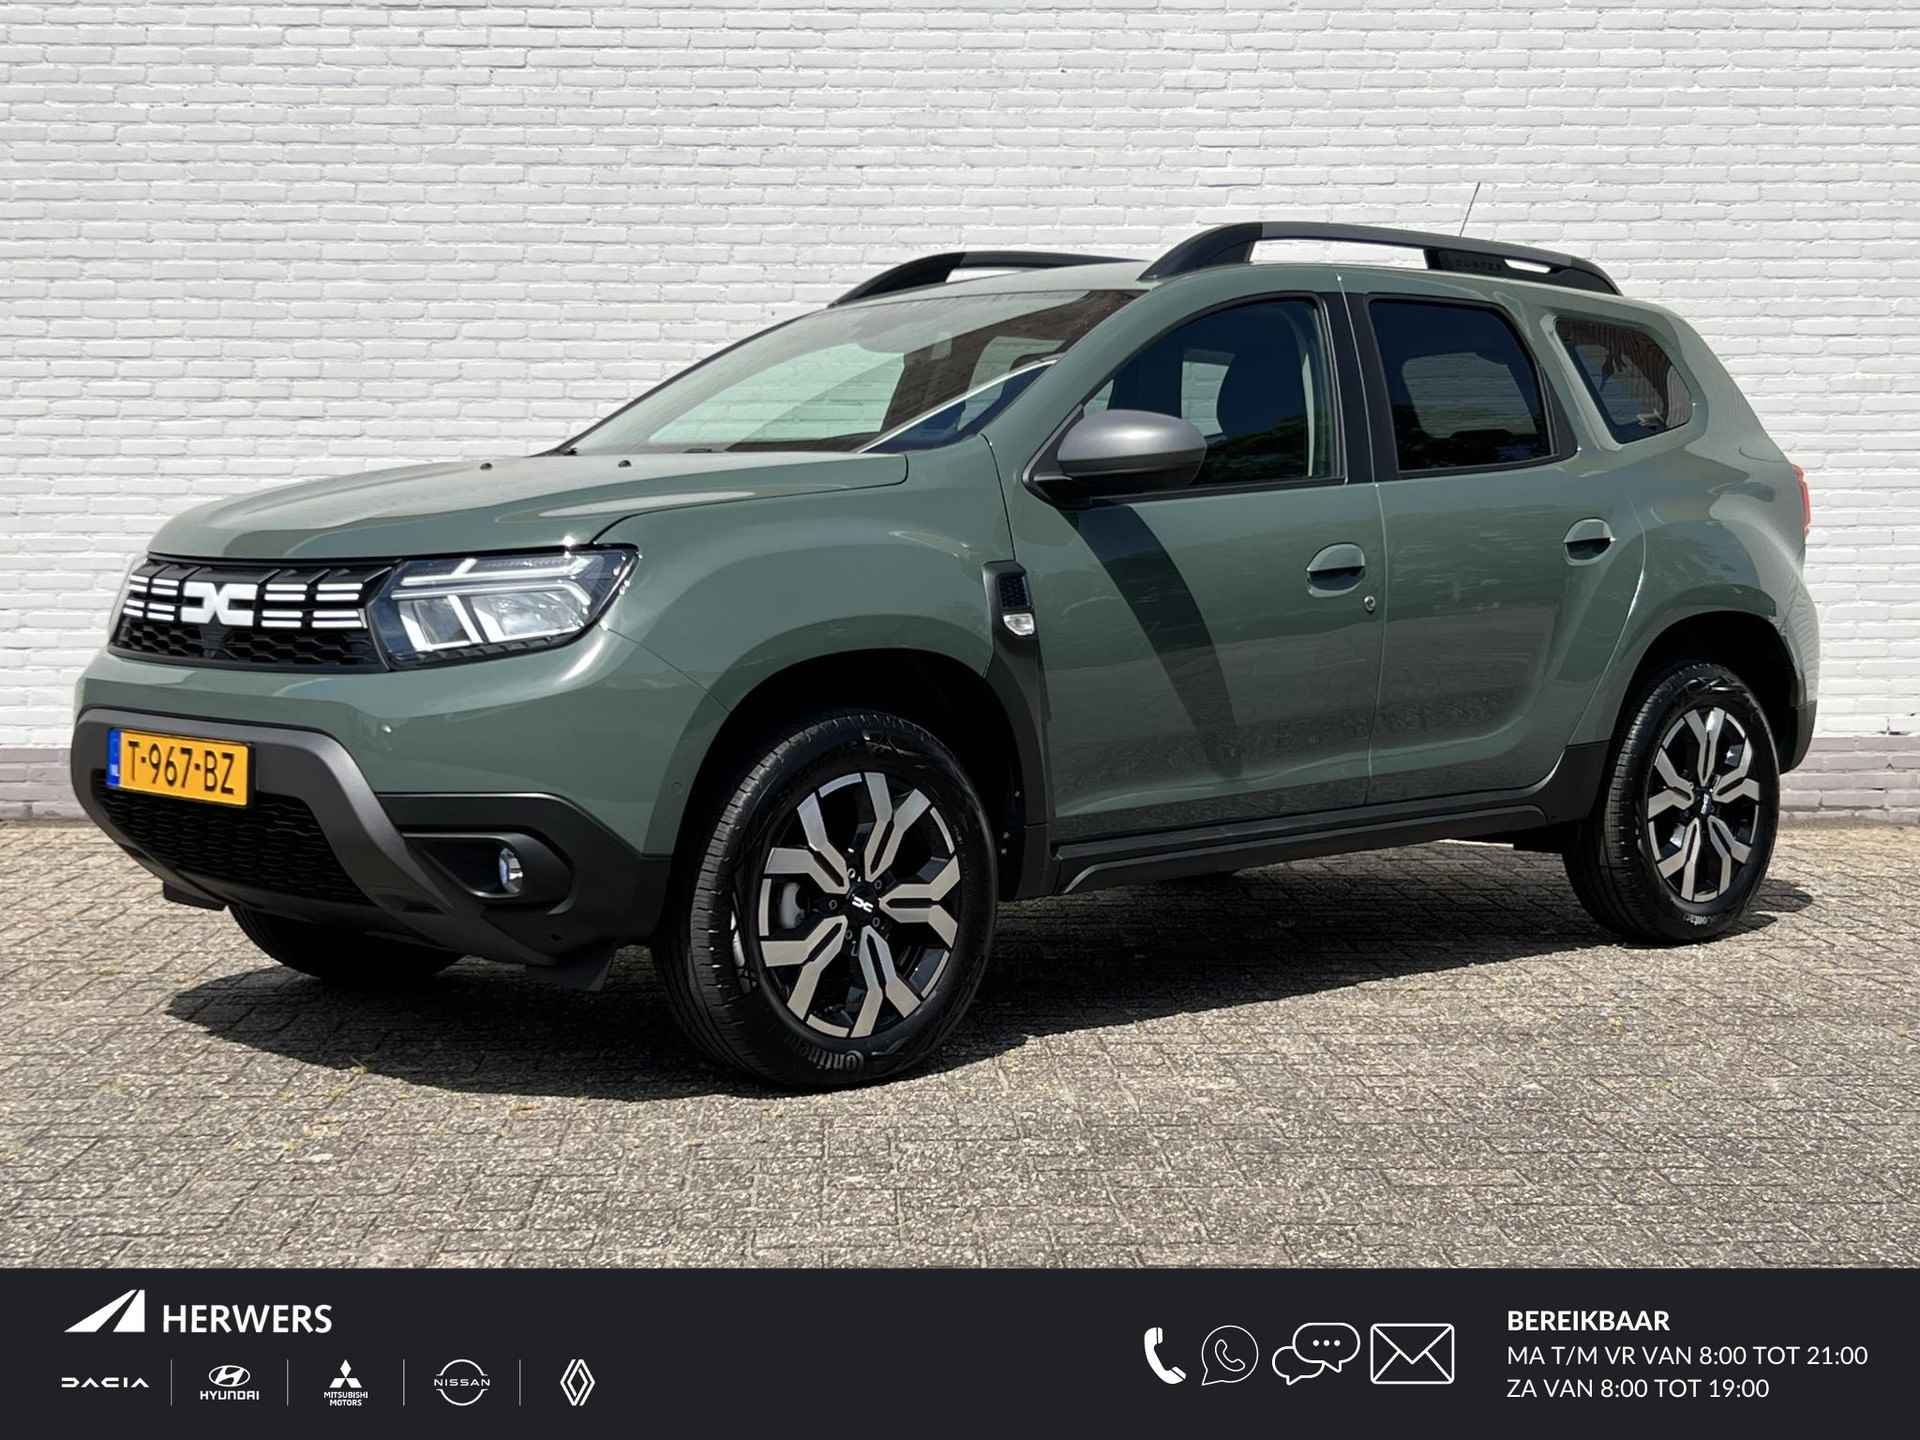 Dacia Duster 1.3 TCe 130 Journey / 360 Camera / Parkeersensoren voor + Achter / Apple Carplay & Android Auto / Navi / Cruise / Clima / DAB / LED / Keyless / - 1/38